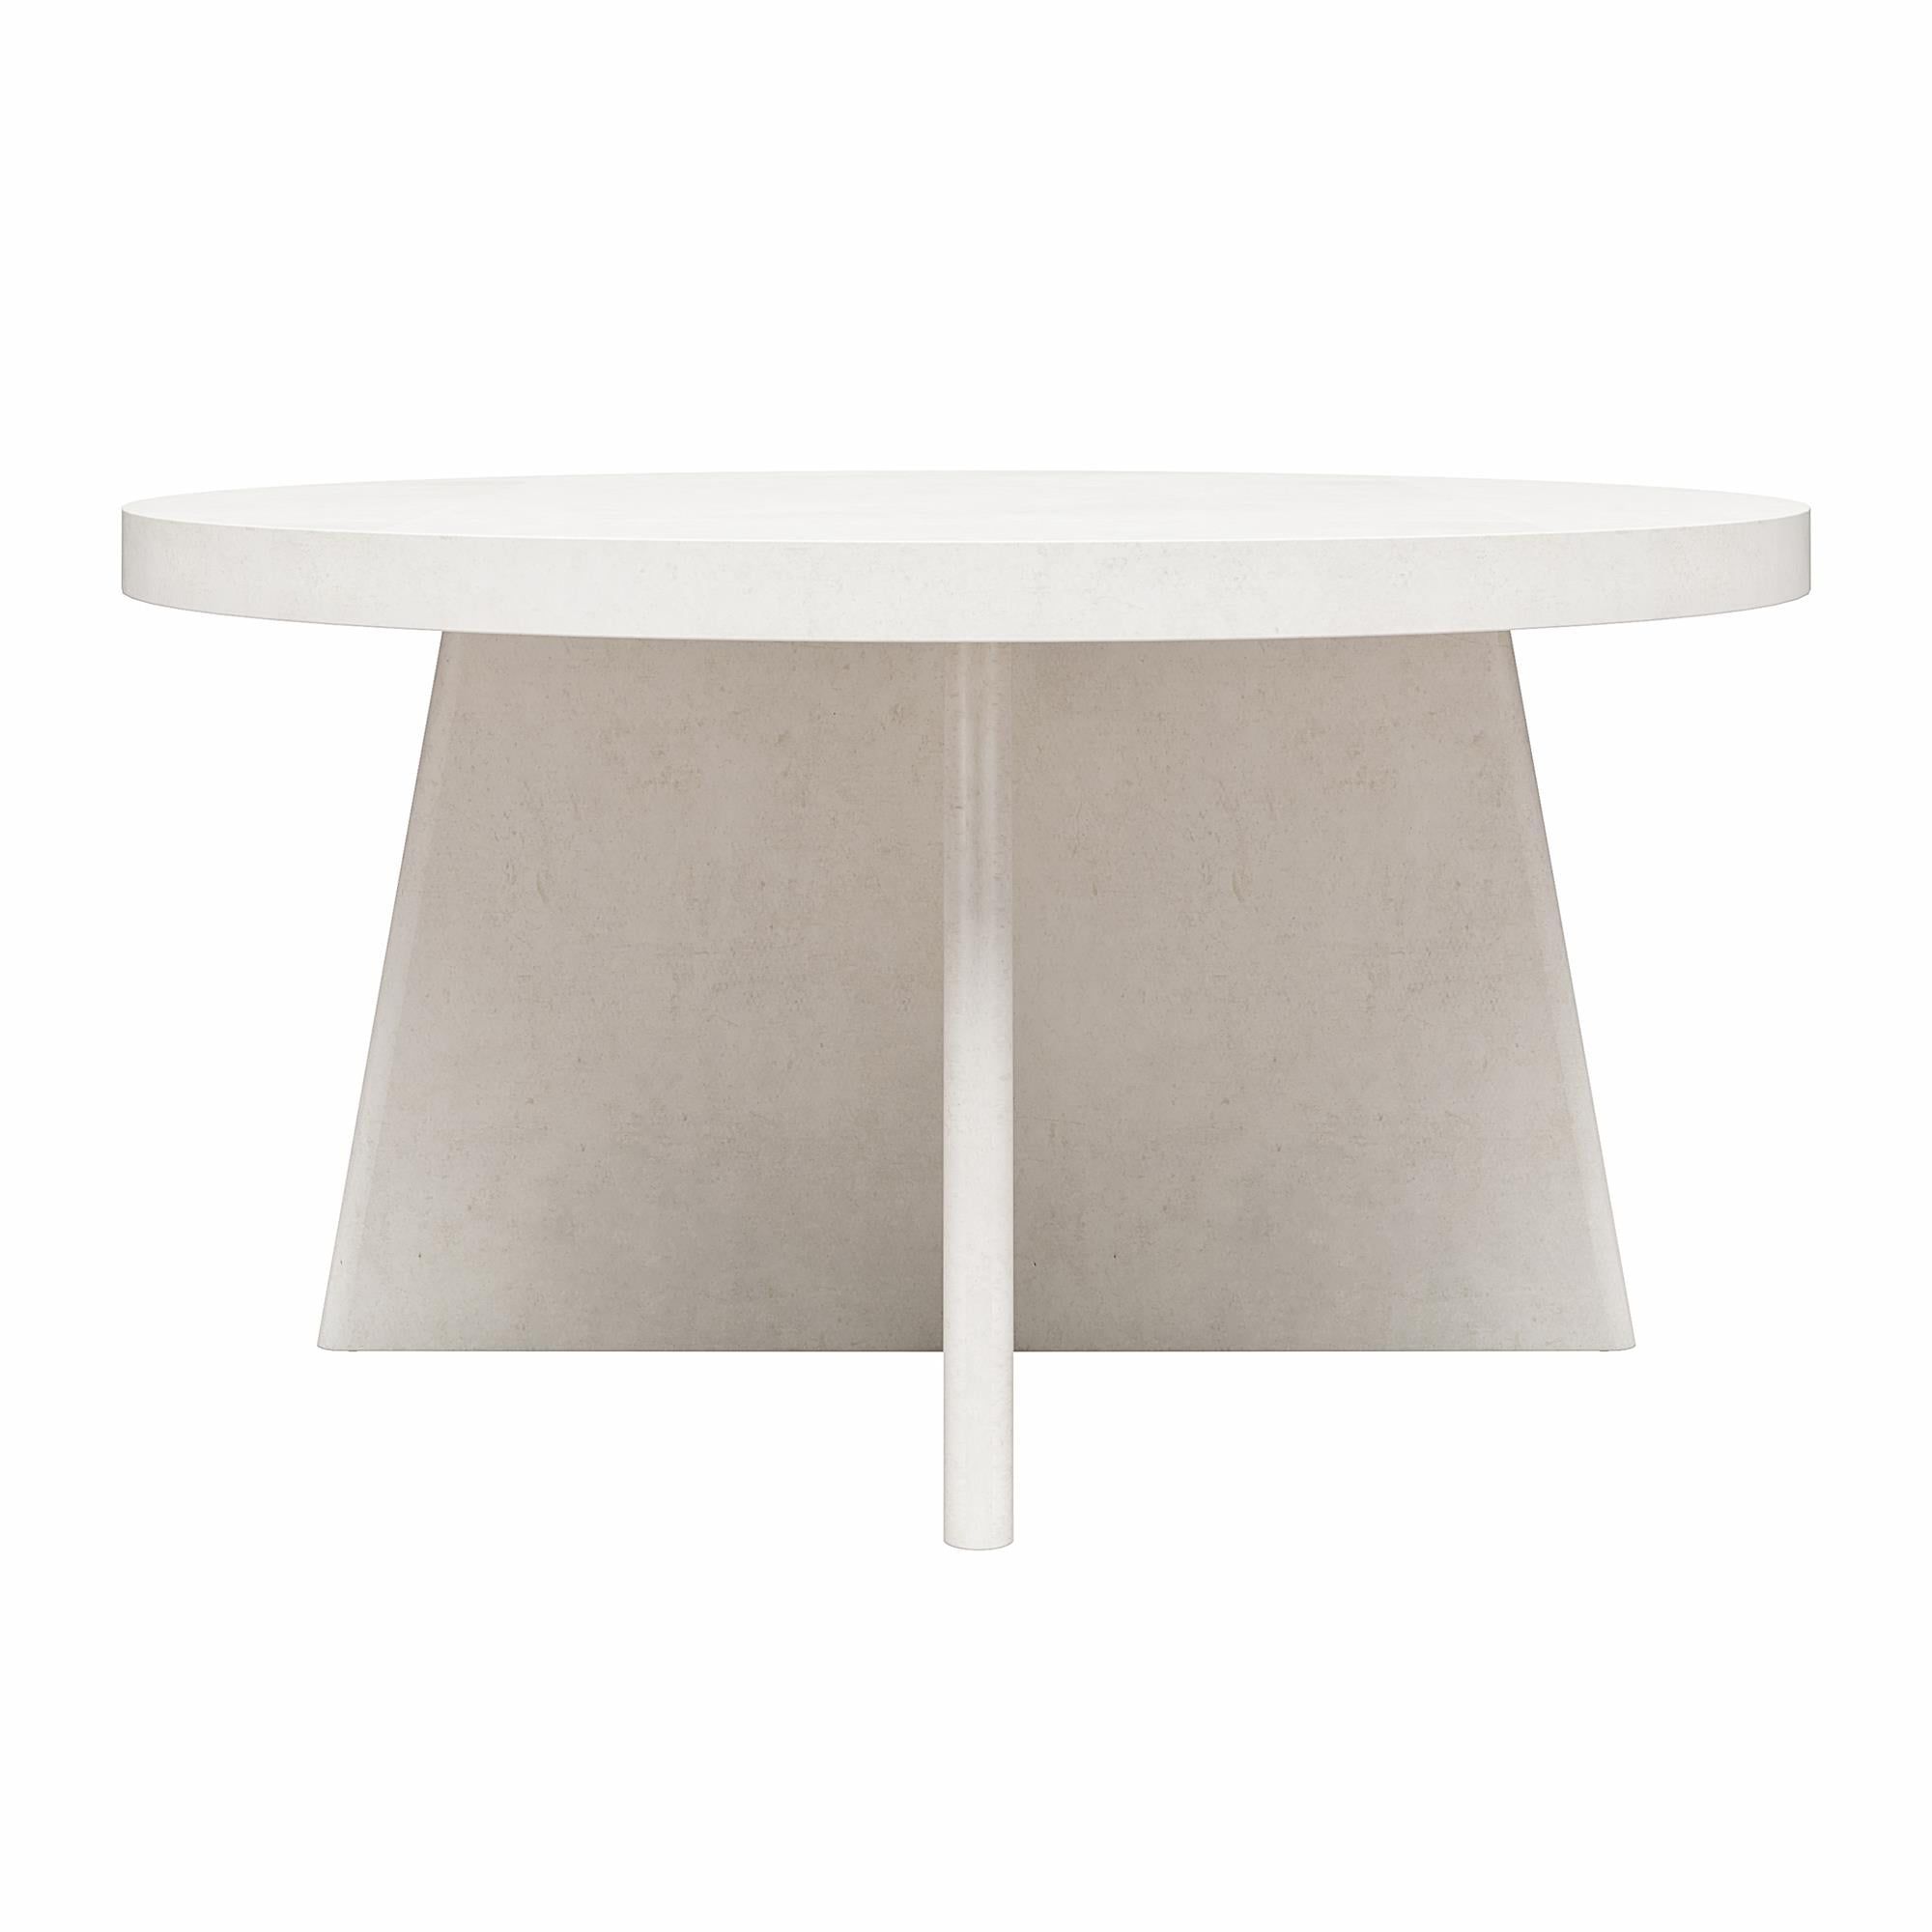 Queer Eye Liam Round Coffee Table, Plaster – Walmart In Liam Round Plaster Coffee Tables (View 11 of 20)